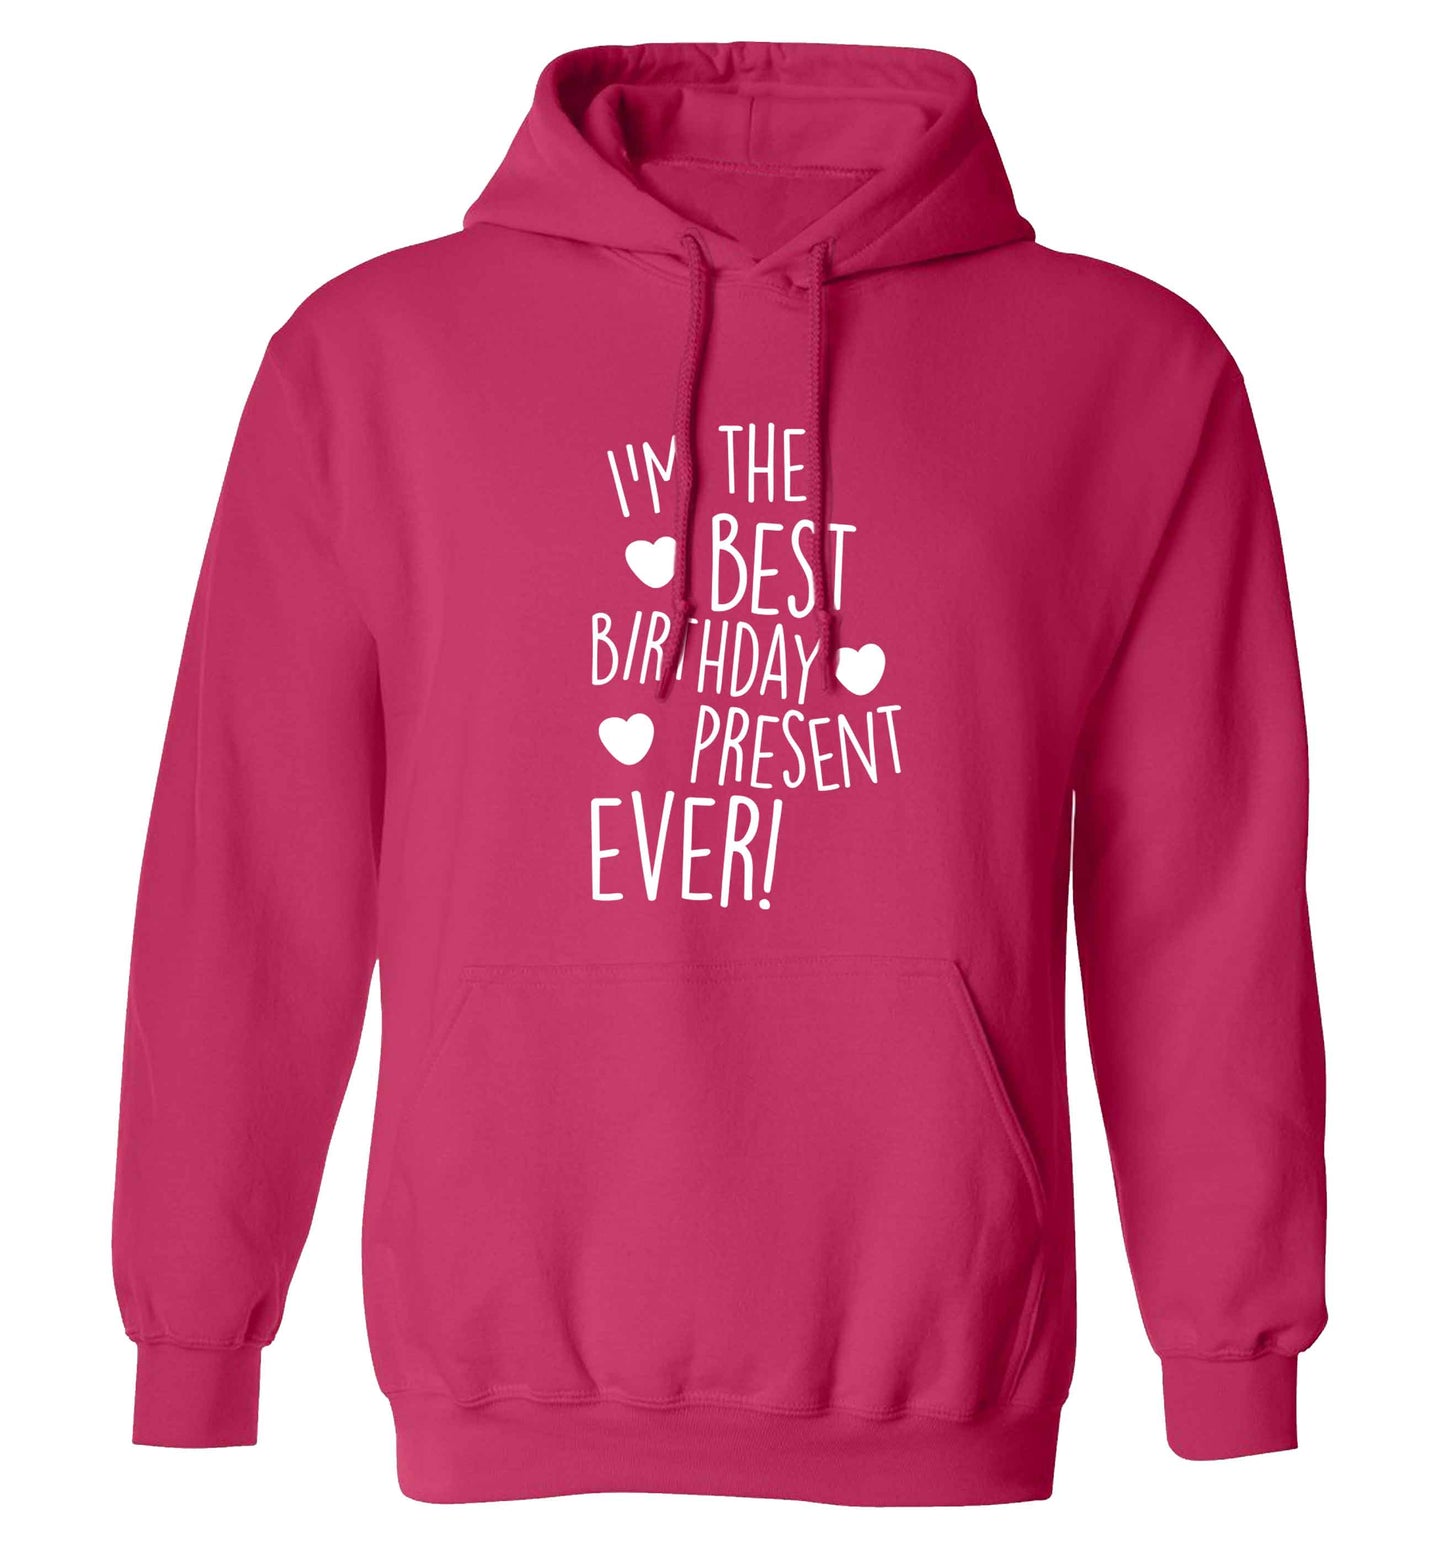 I'm the best birthday present ever adults unisex pink hoodie 2XL